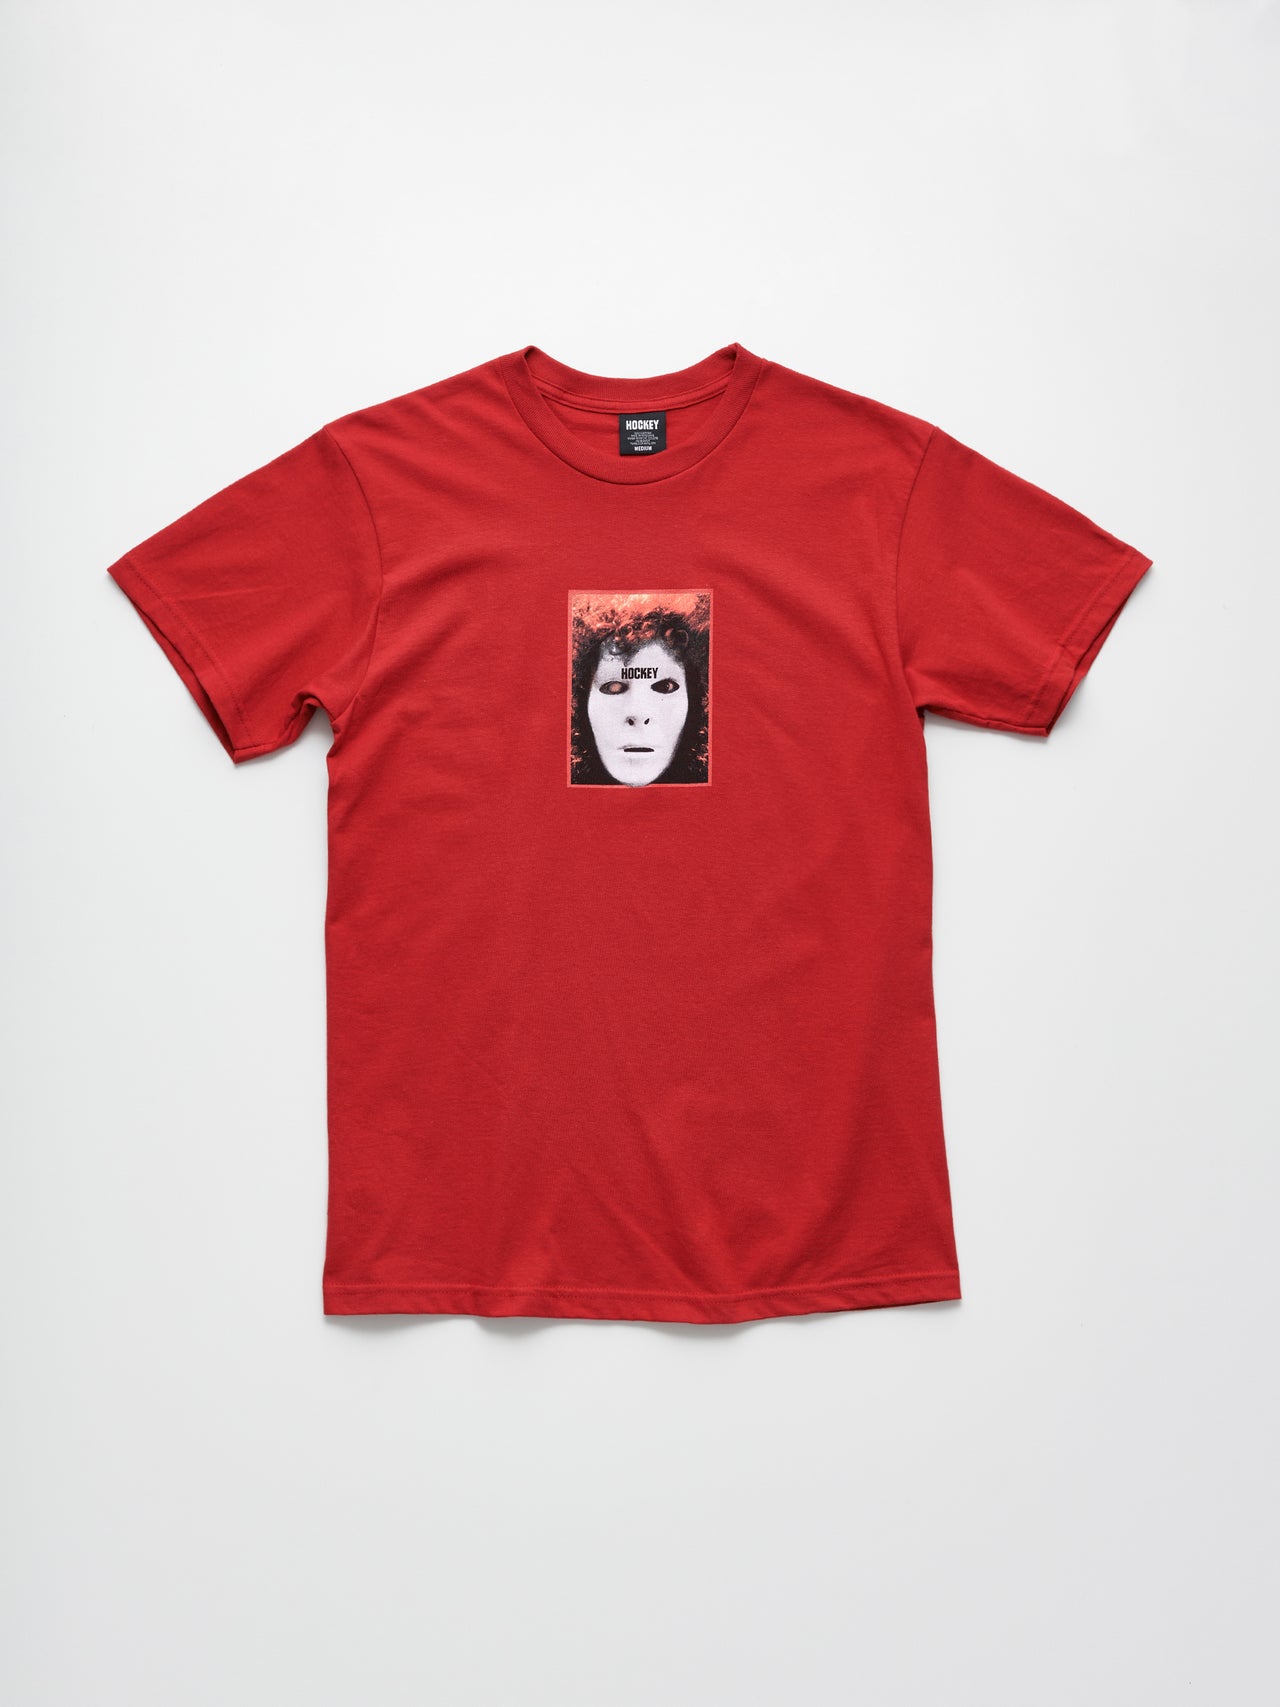 HOCKEY No Manners Tee Red